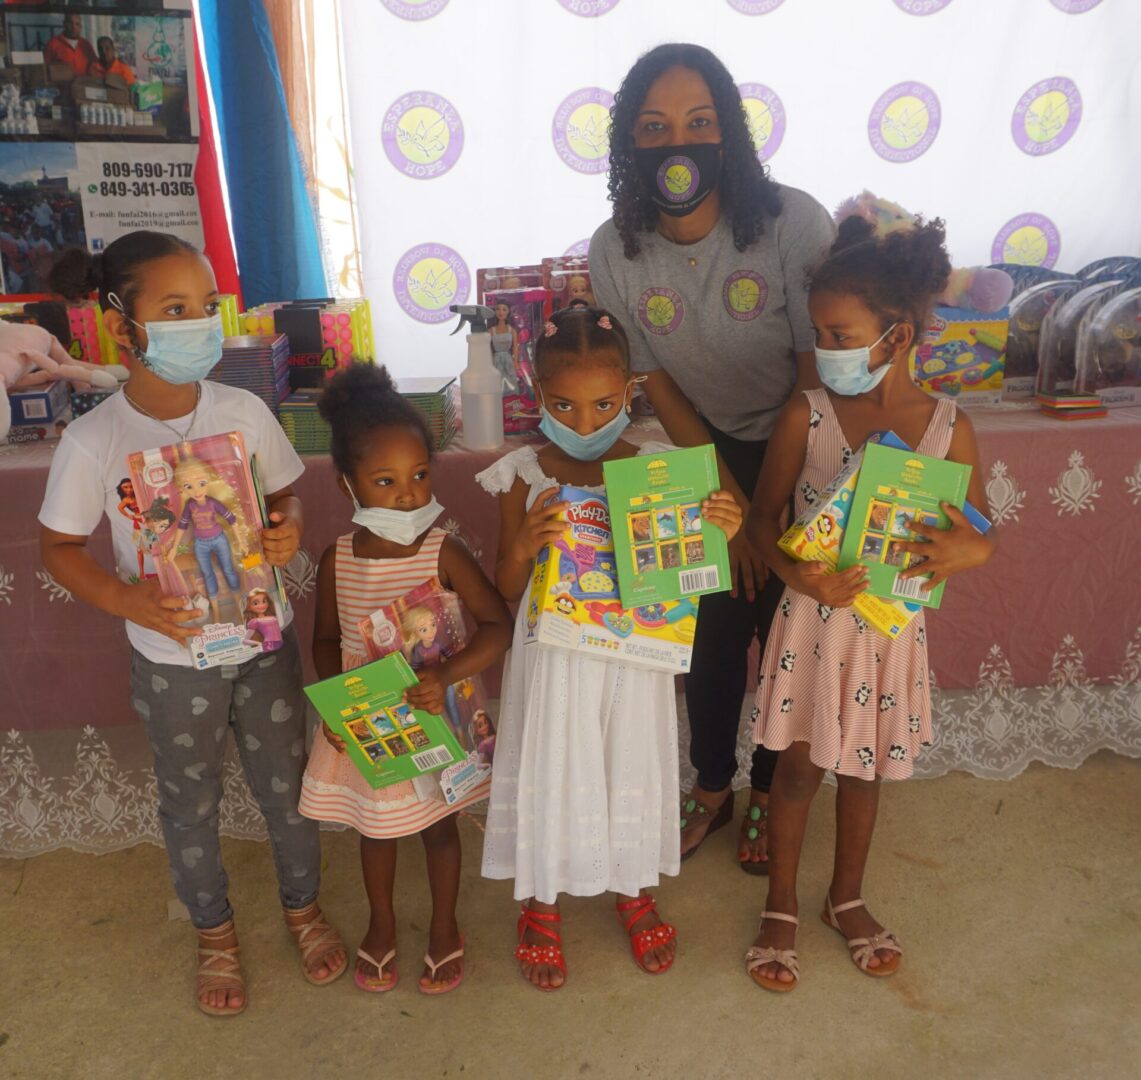 Four young girls wearing masks and holding books and toys, batch 4